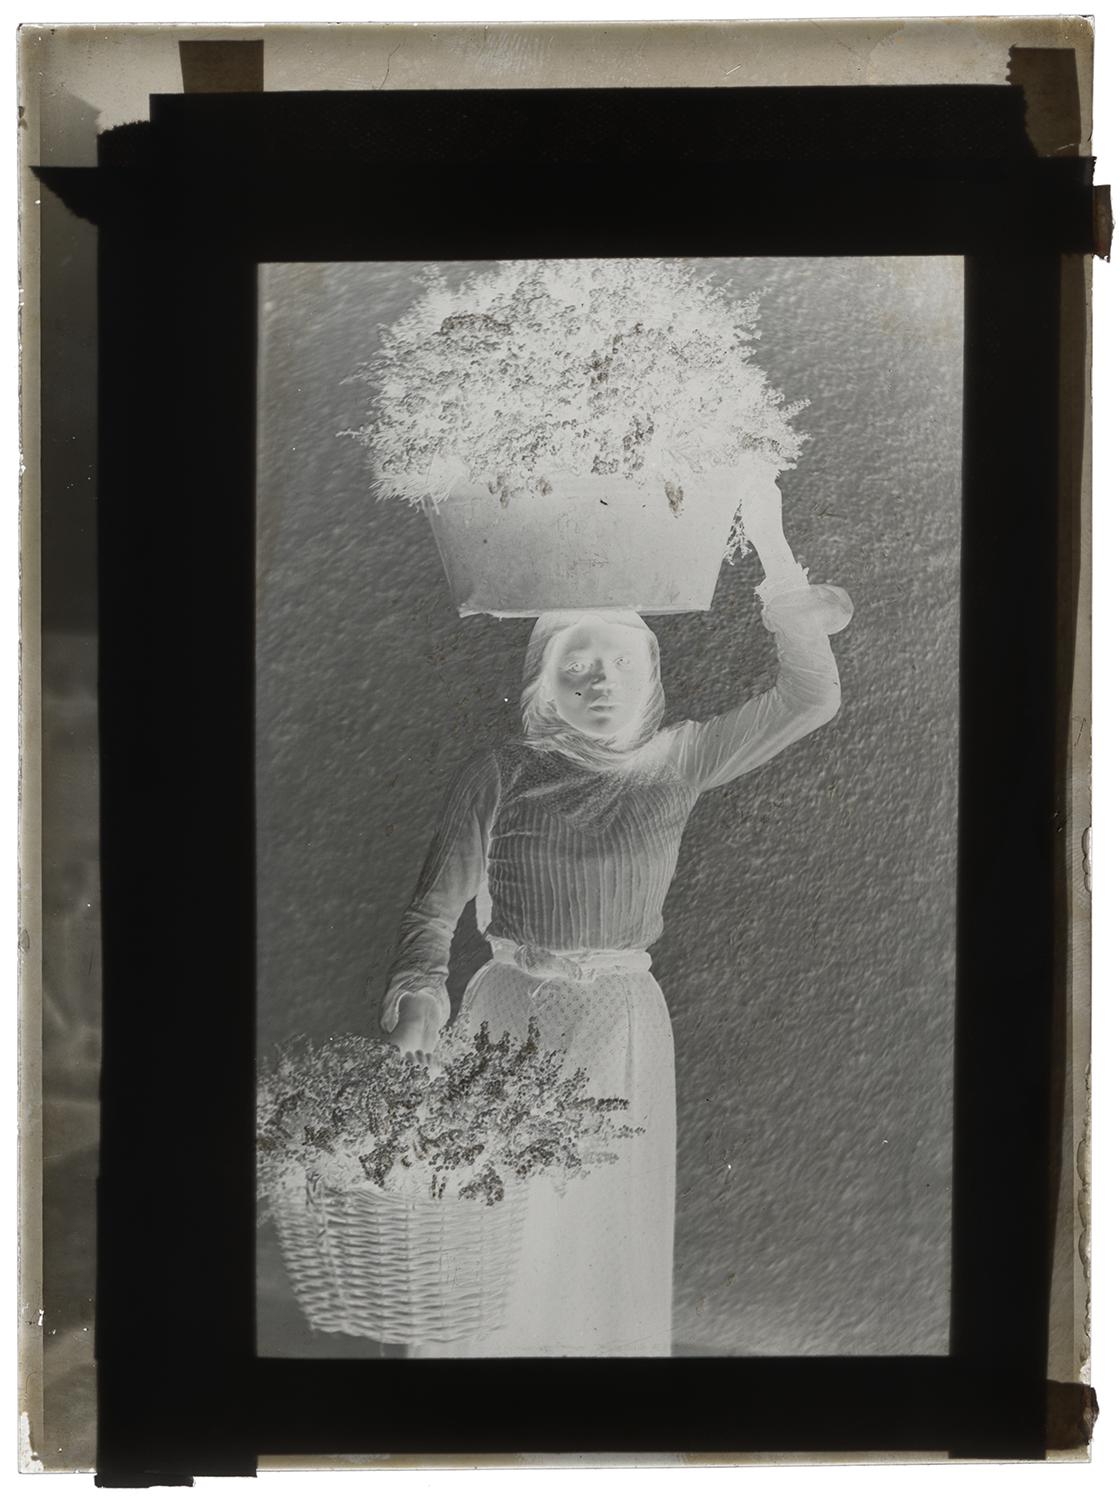 A negative of a portrait of a woman holding a large vessel with flowers on her head with her right hand and a large basket of flowers in her left hand by her waist. She is looking into the camera. Black and white photograph by Minna Keene.